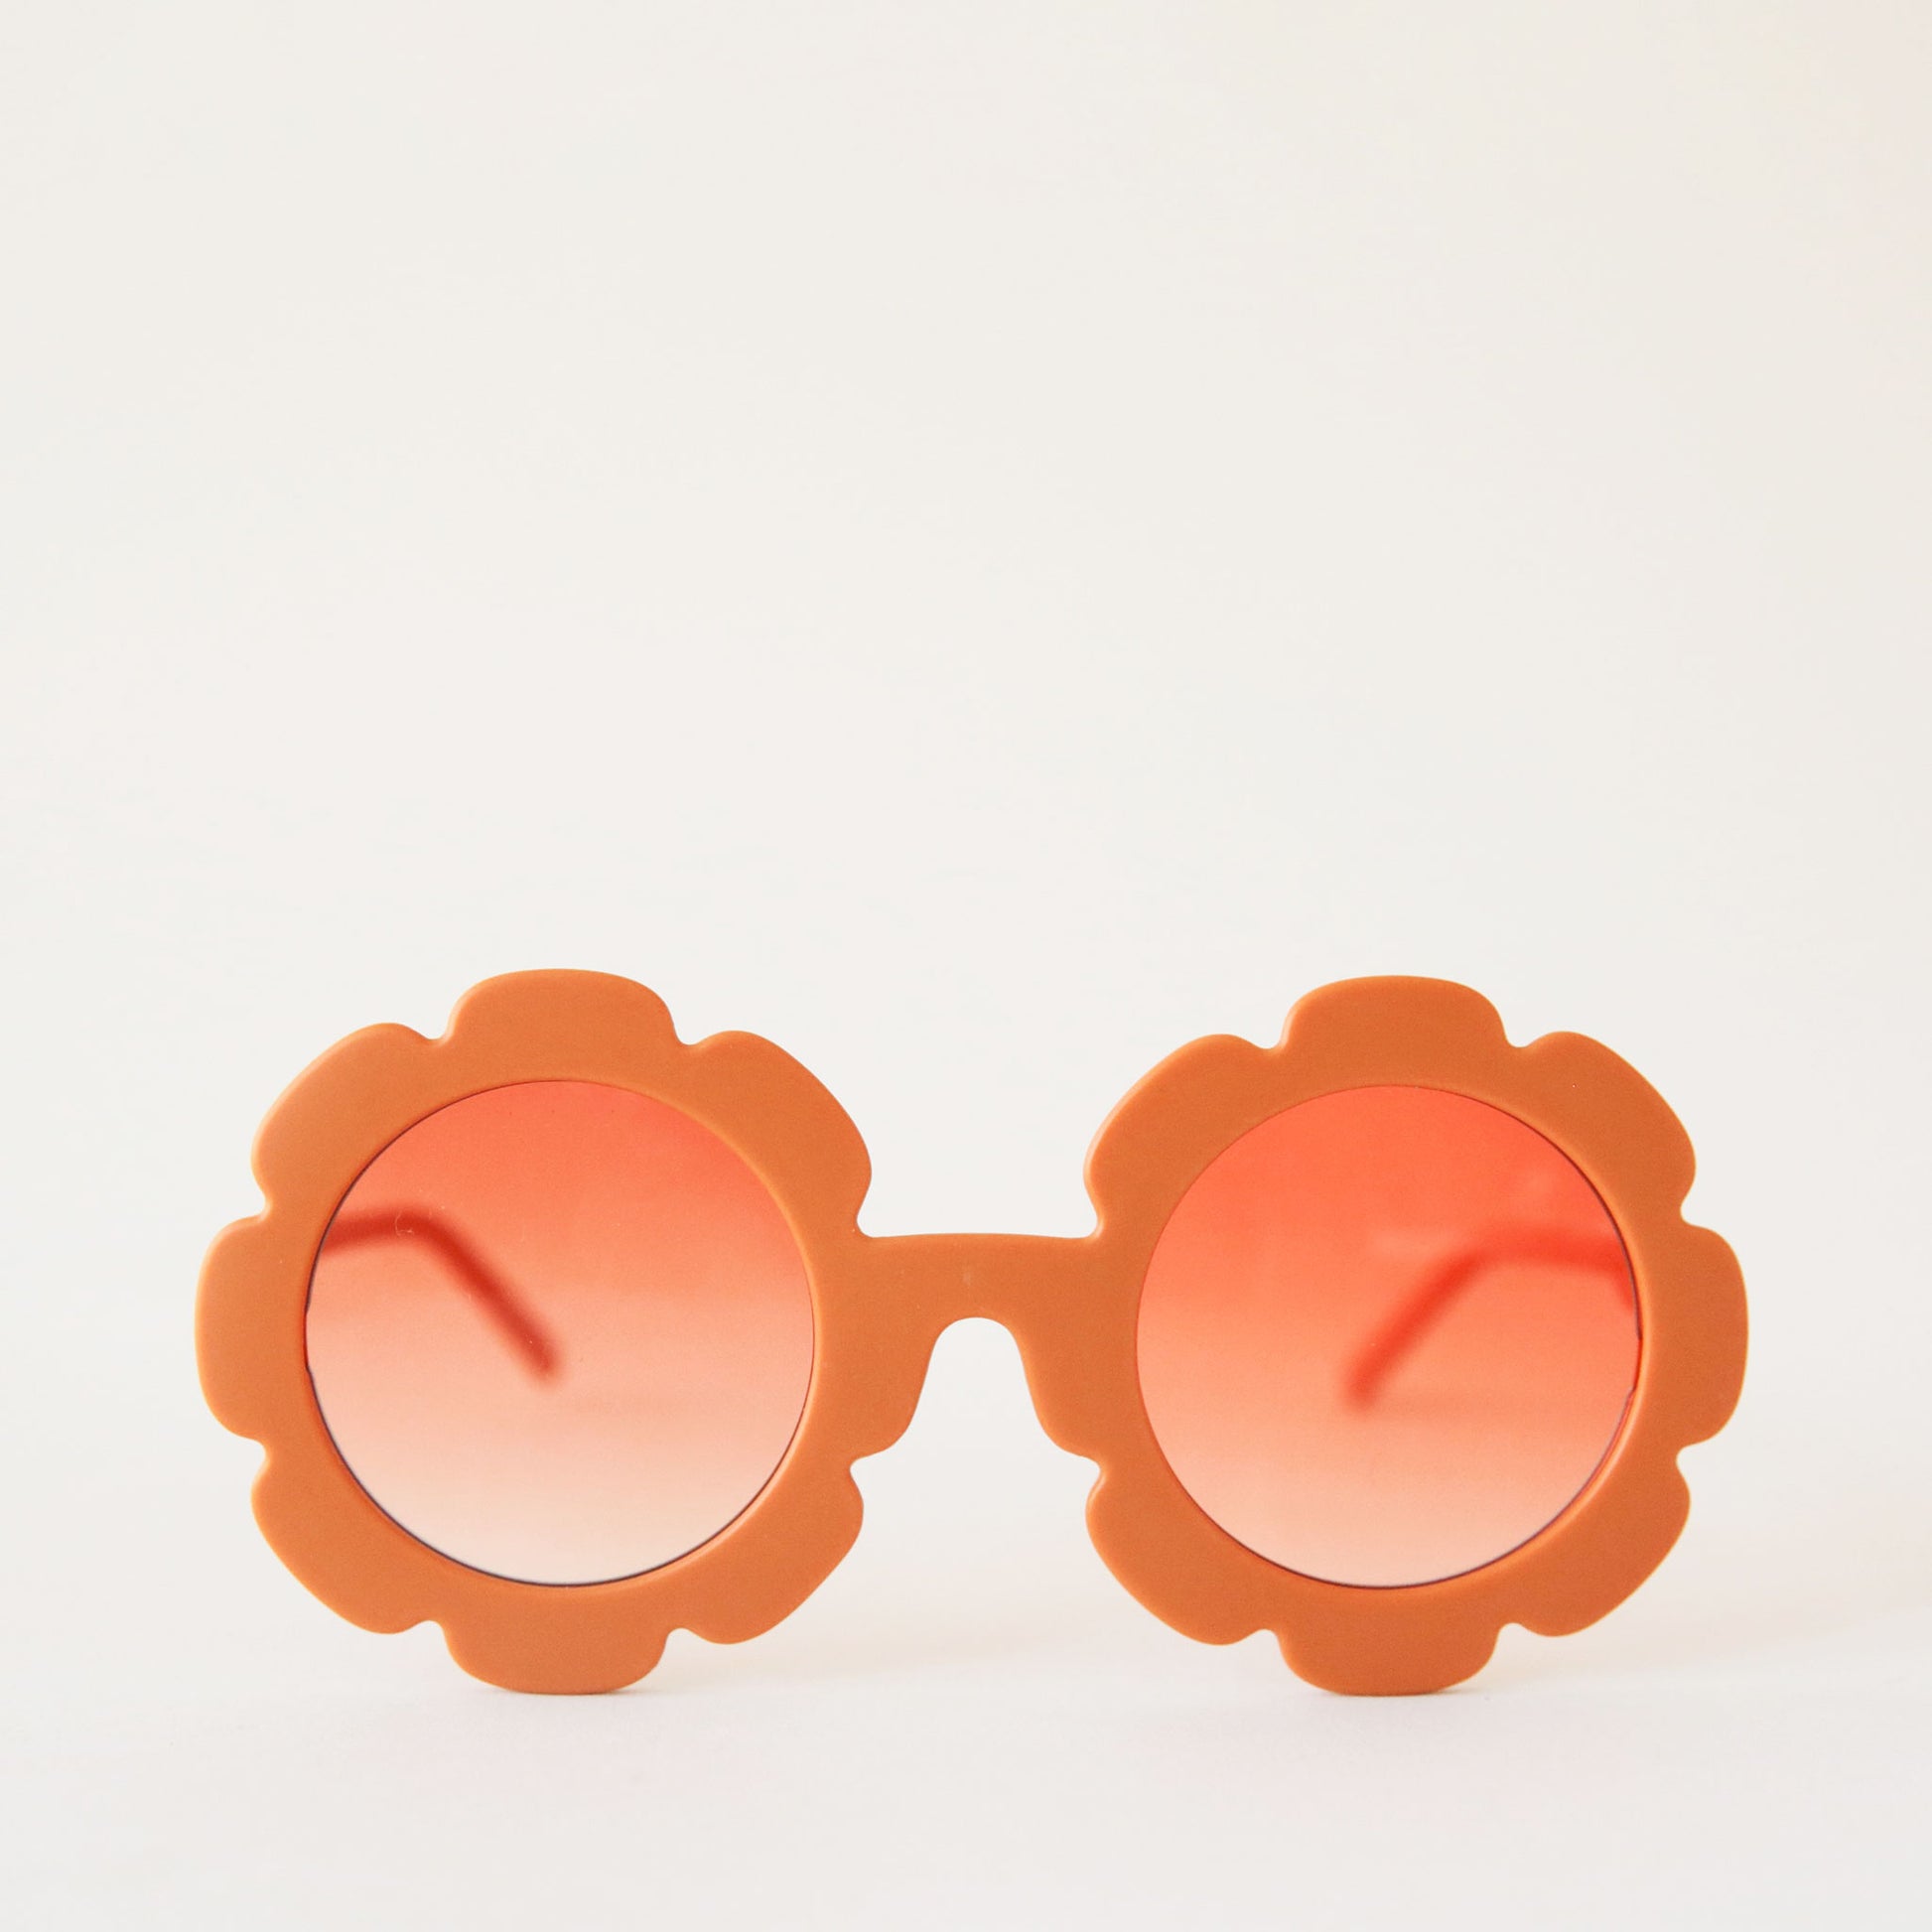 On a white background is a pair of orange, flower shaped sunglasses with a light orange lens. 